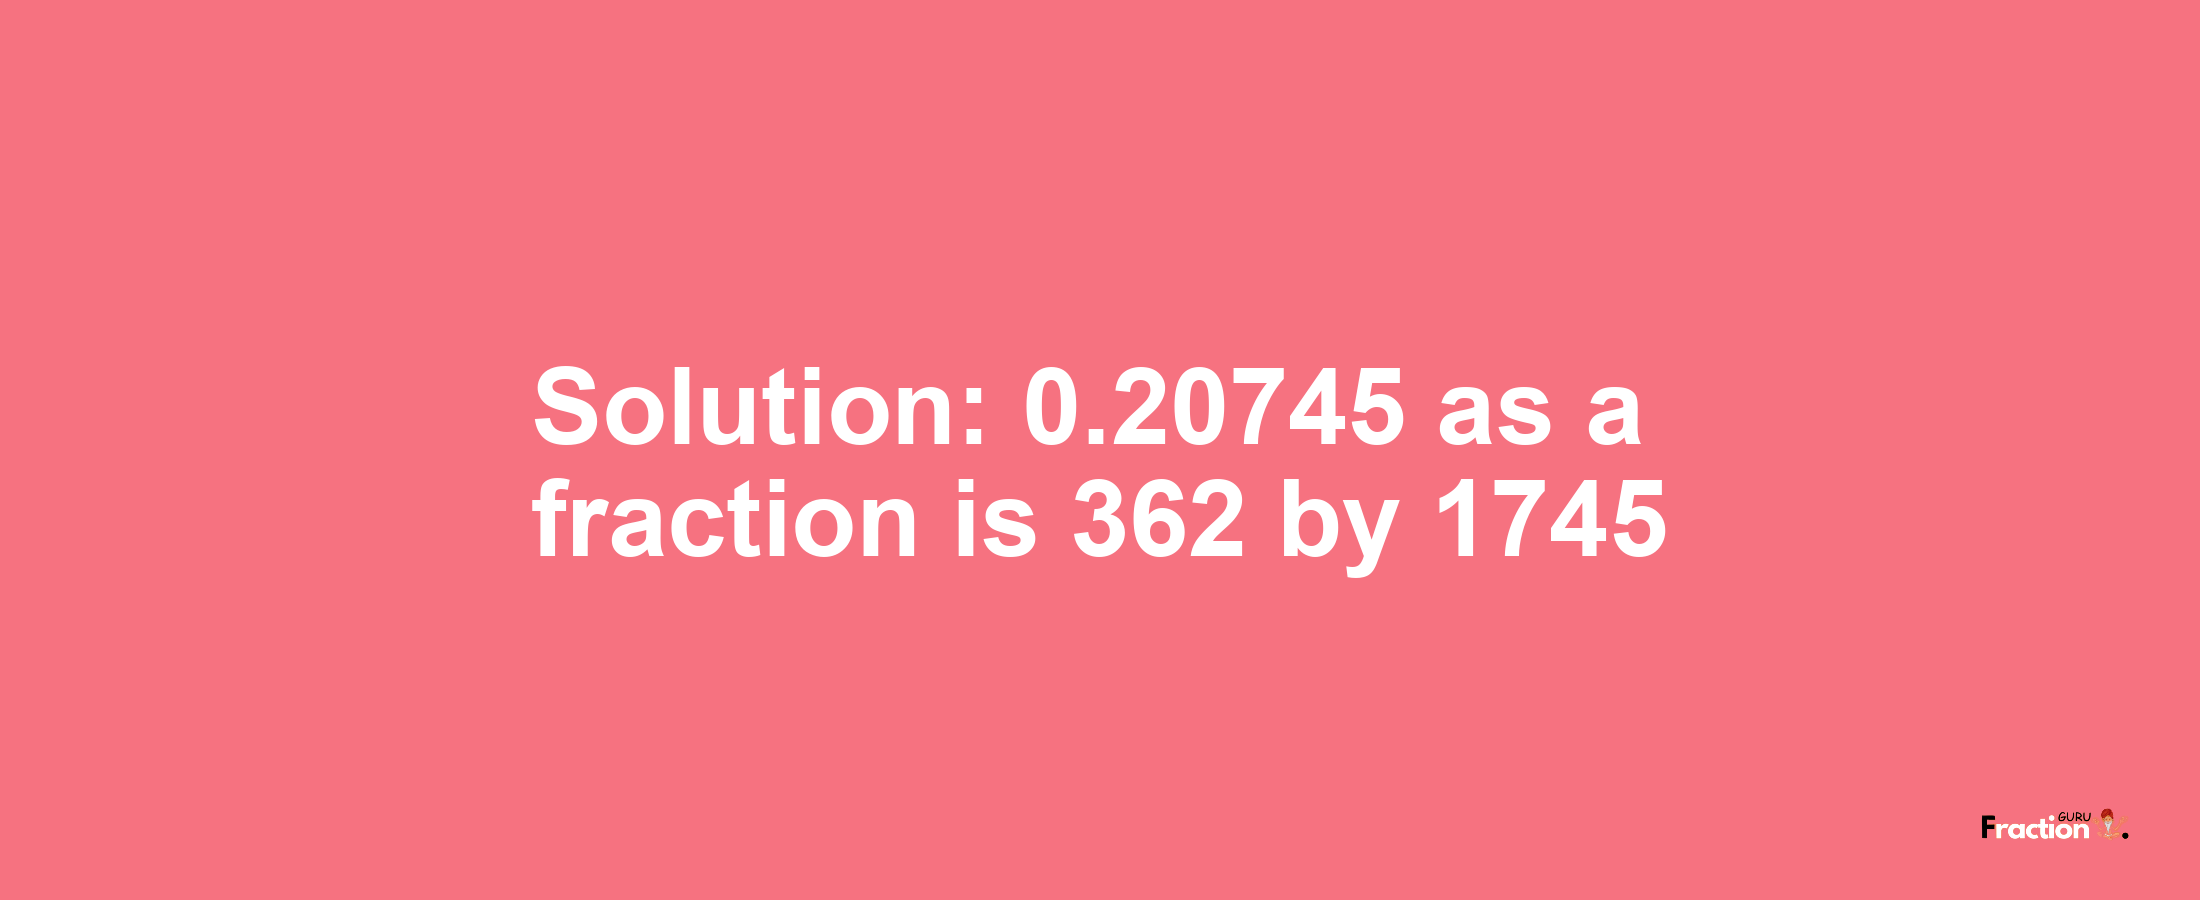 Solution:0.20745 as a fraction is 362/1745